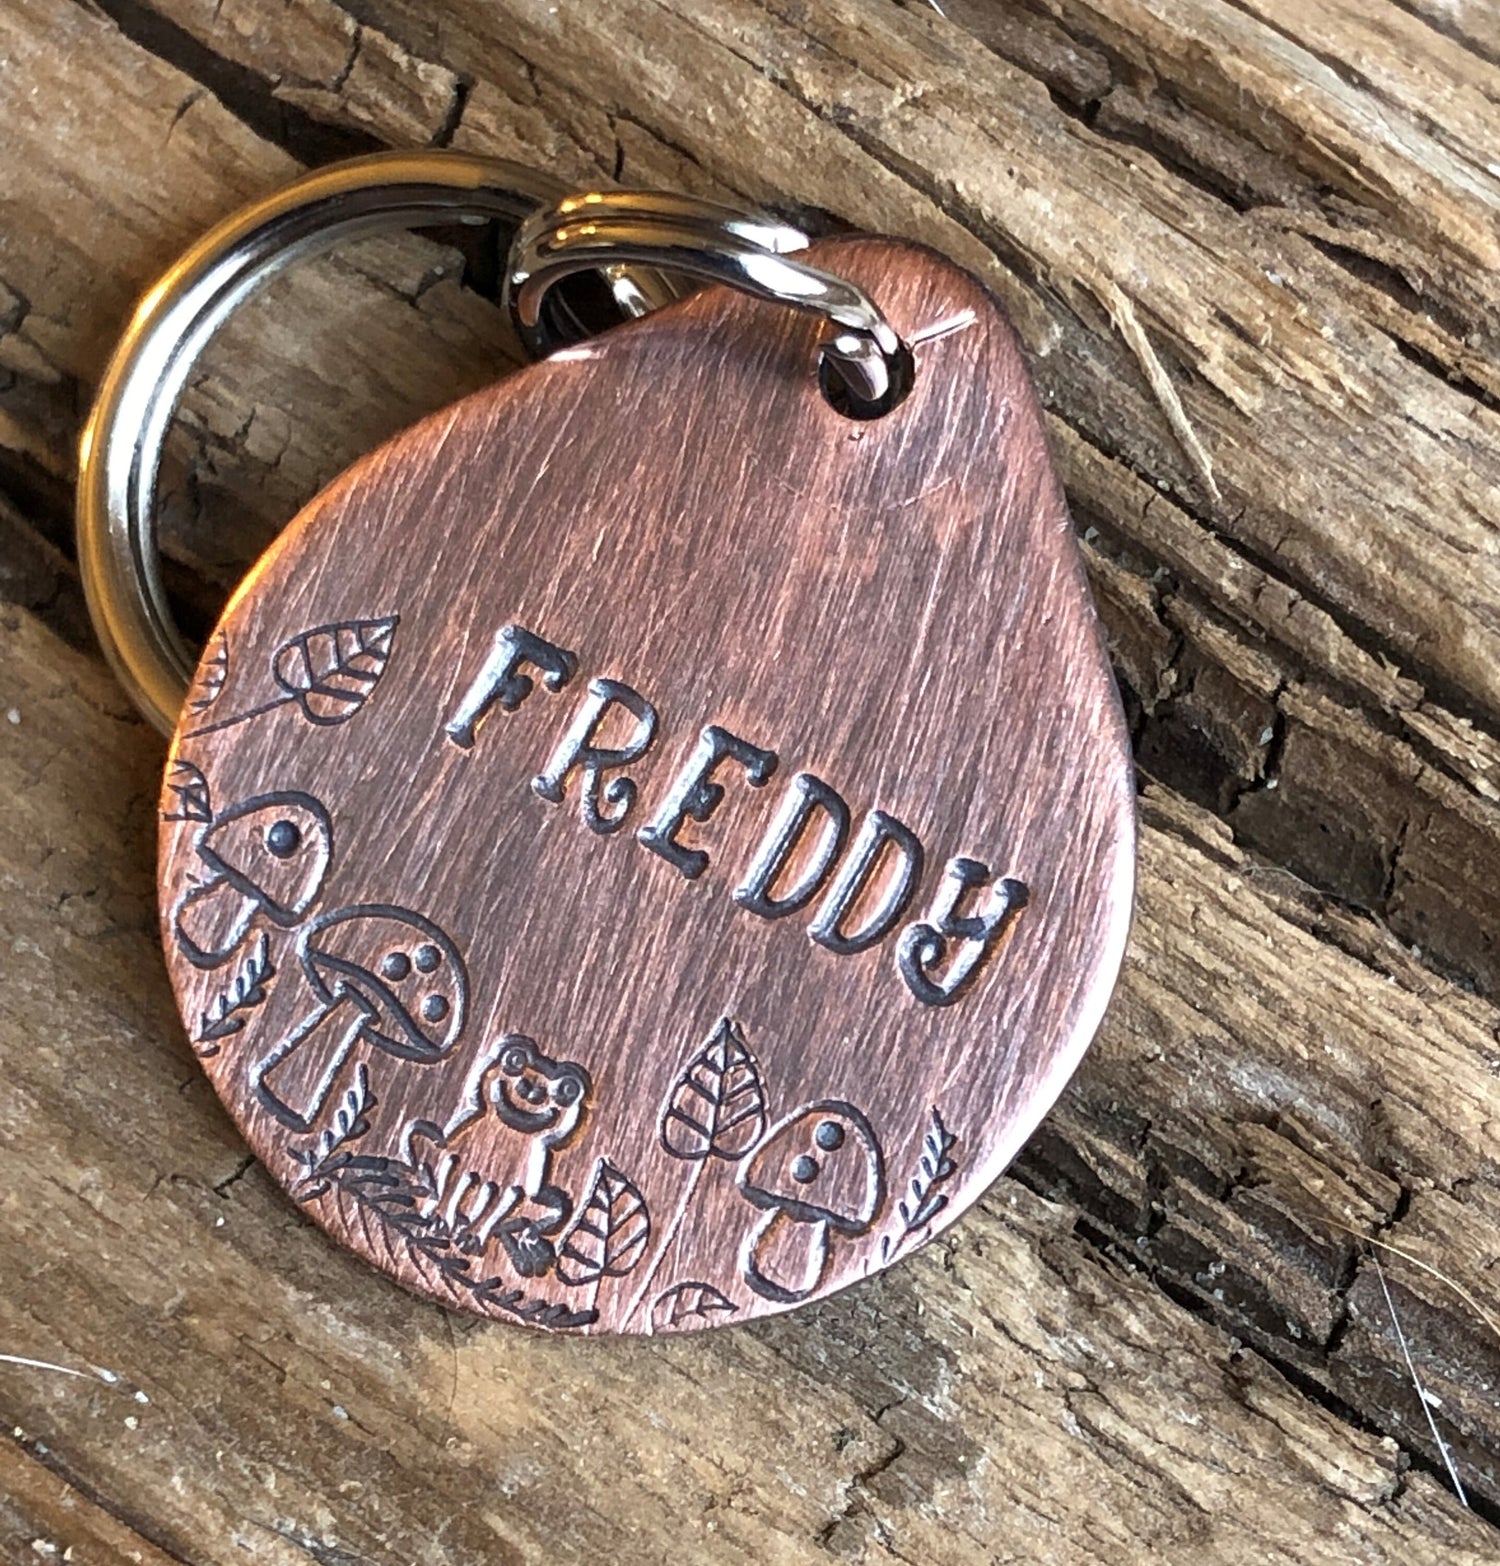 Dog Tag, Dog ID Tag, Hand Stamped Dog Tag, Dog Tag for Collar, Pet ID Tag, Personalized Tag, Freddy, Oval Tag with Mushrooms and Frog